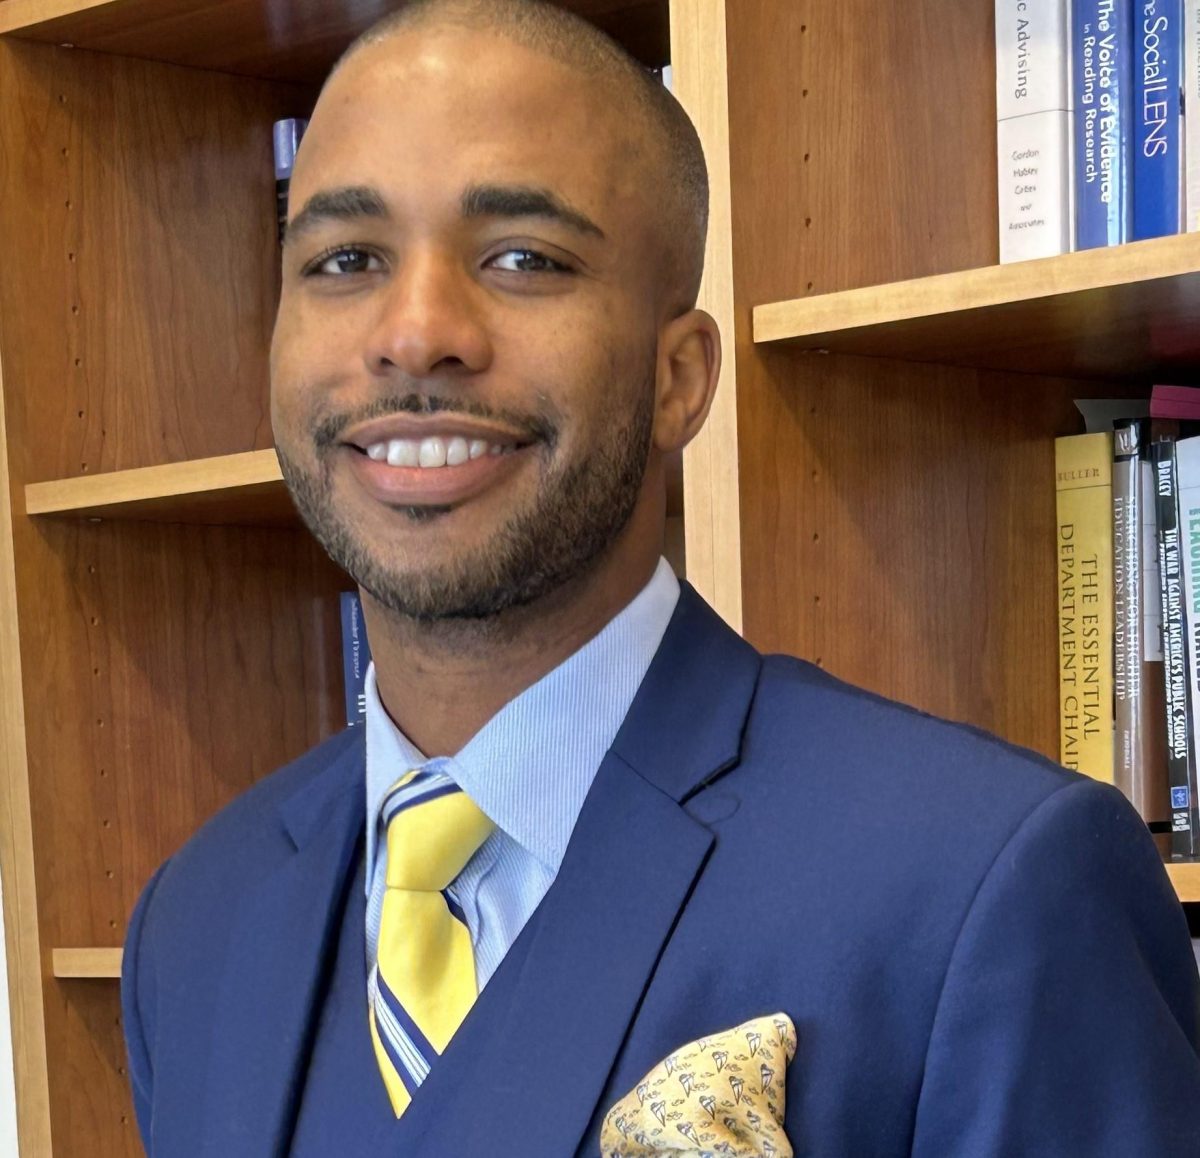 Stanley Bazile, Vice President for Student Affairs and Dean of Students at St. Francis College in Brooklyn, will work  to  provide leadership and strategic direction to professional staff and student employees to enhance student engagement, leadership and success.